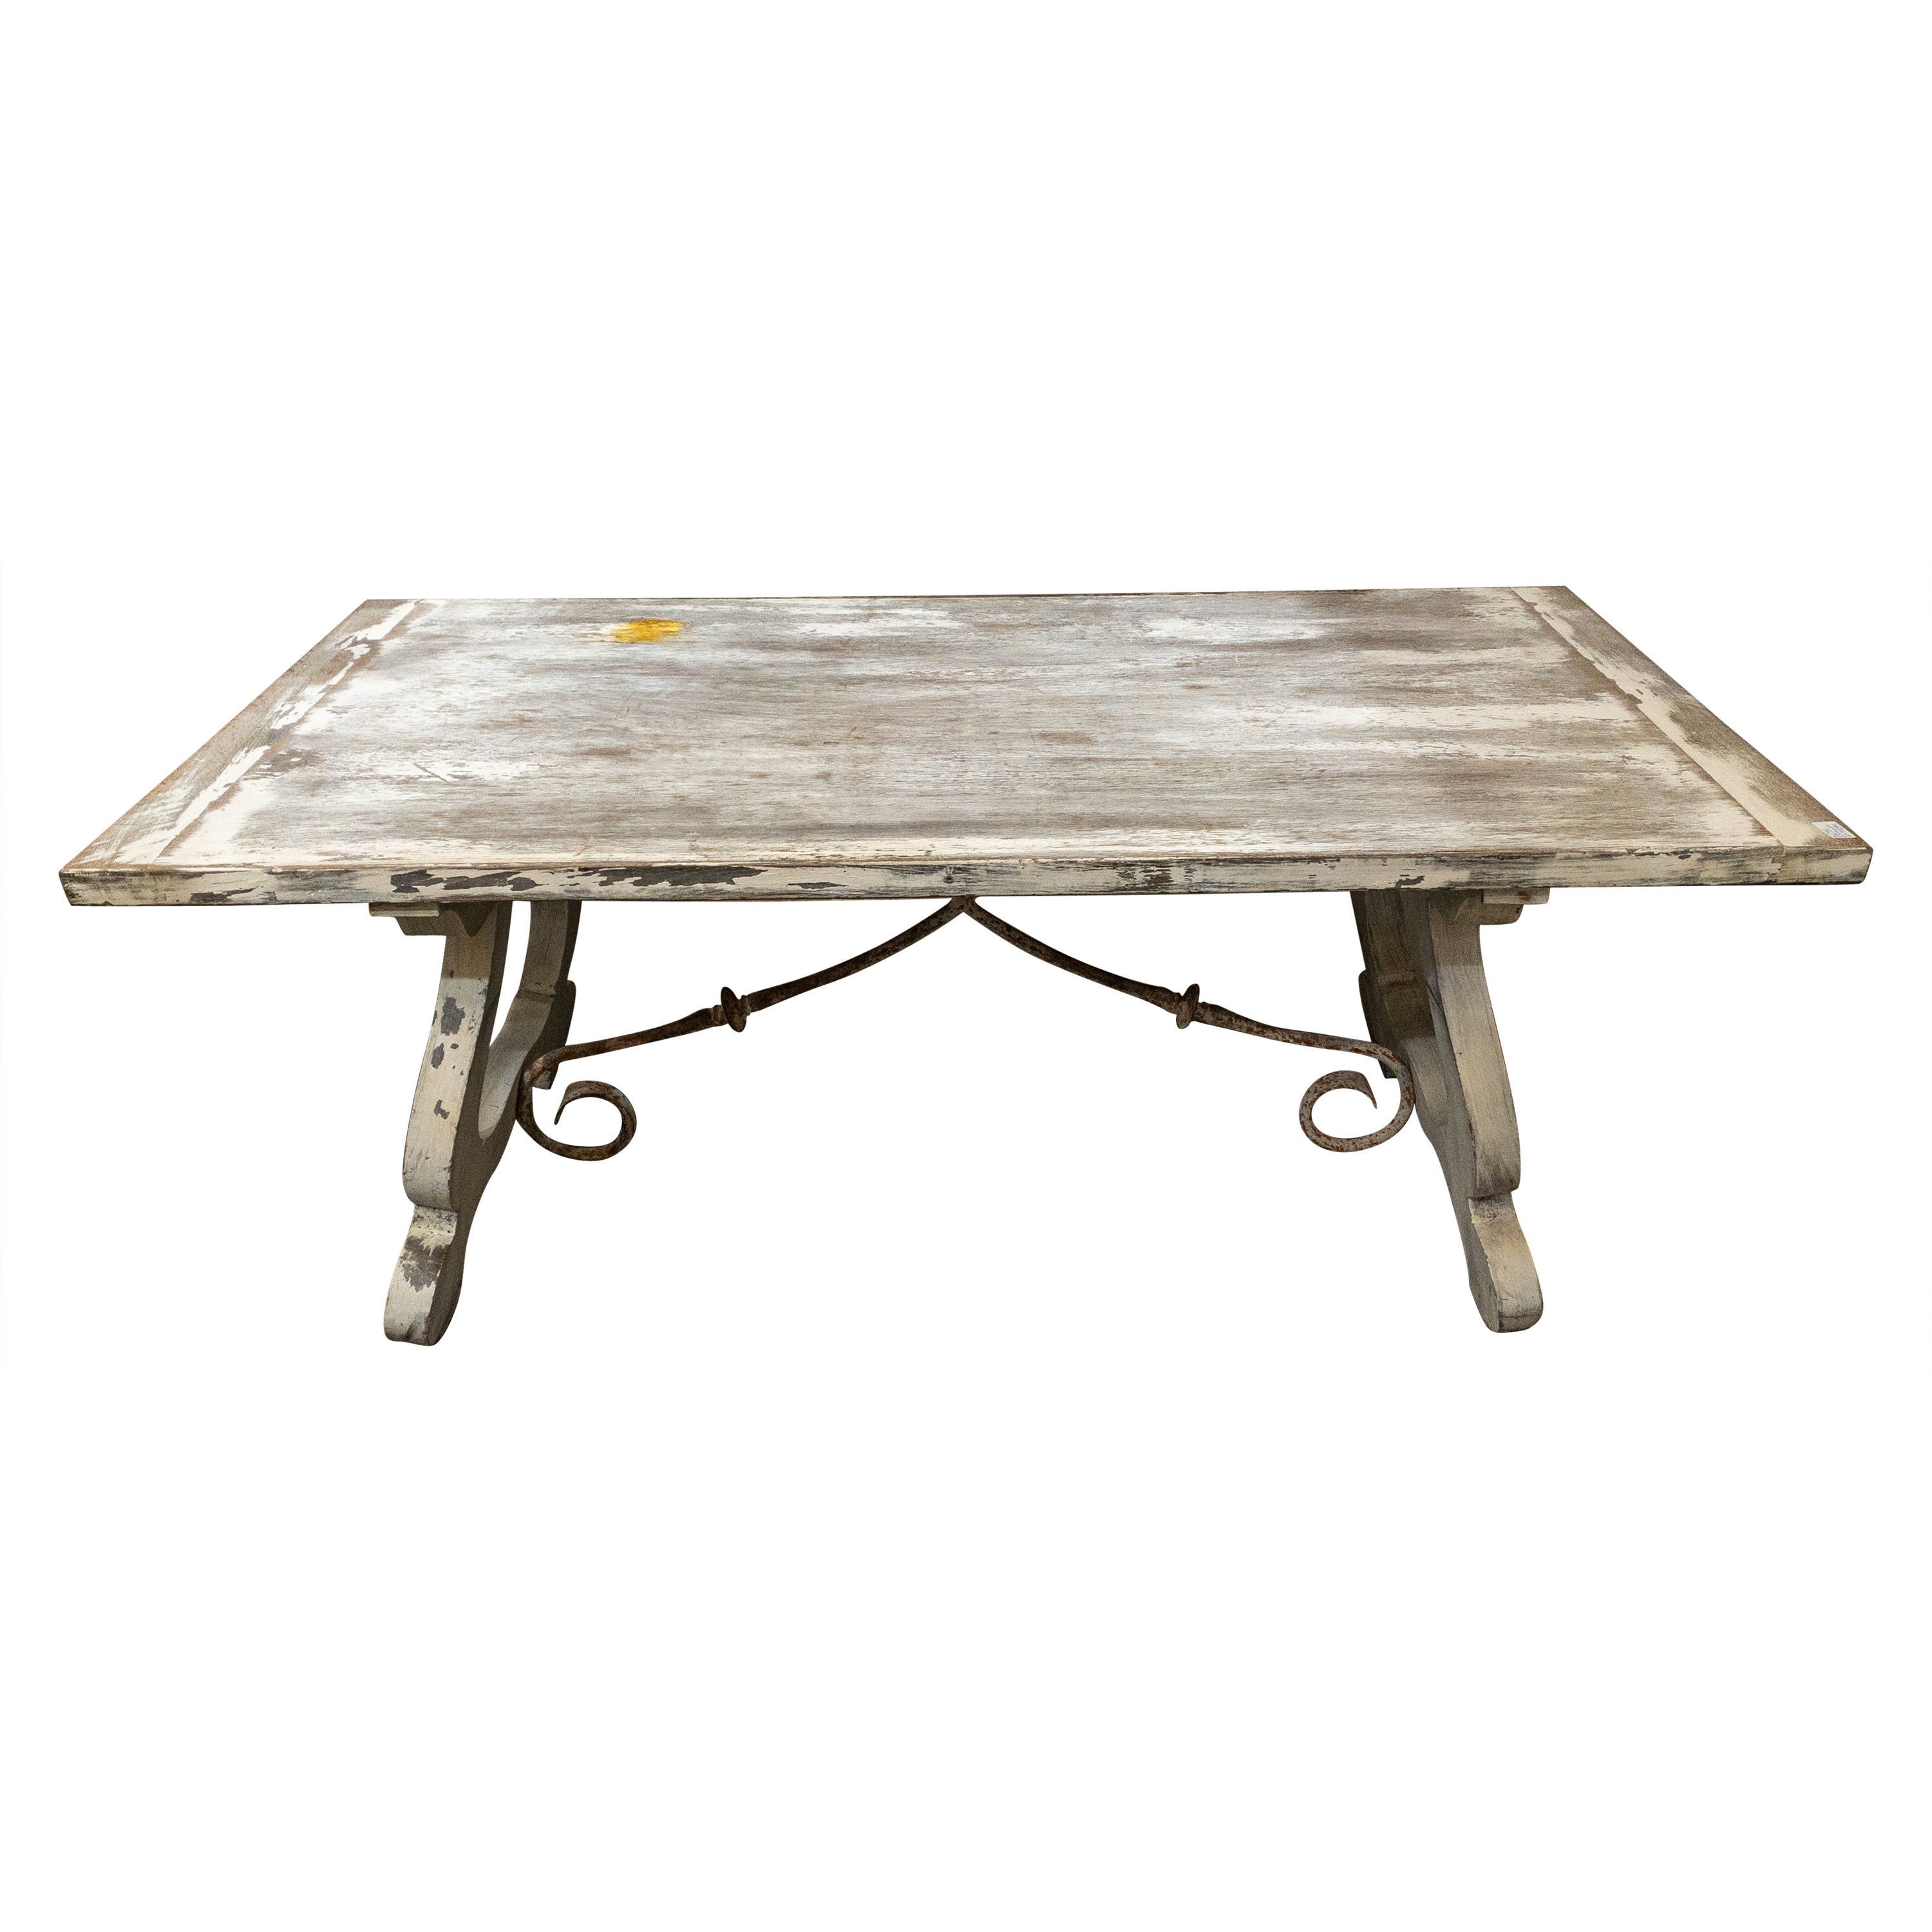 Late 19th Century Painted Dining Table